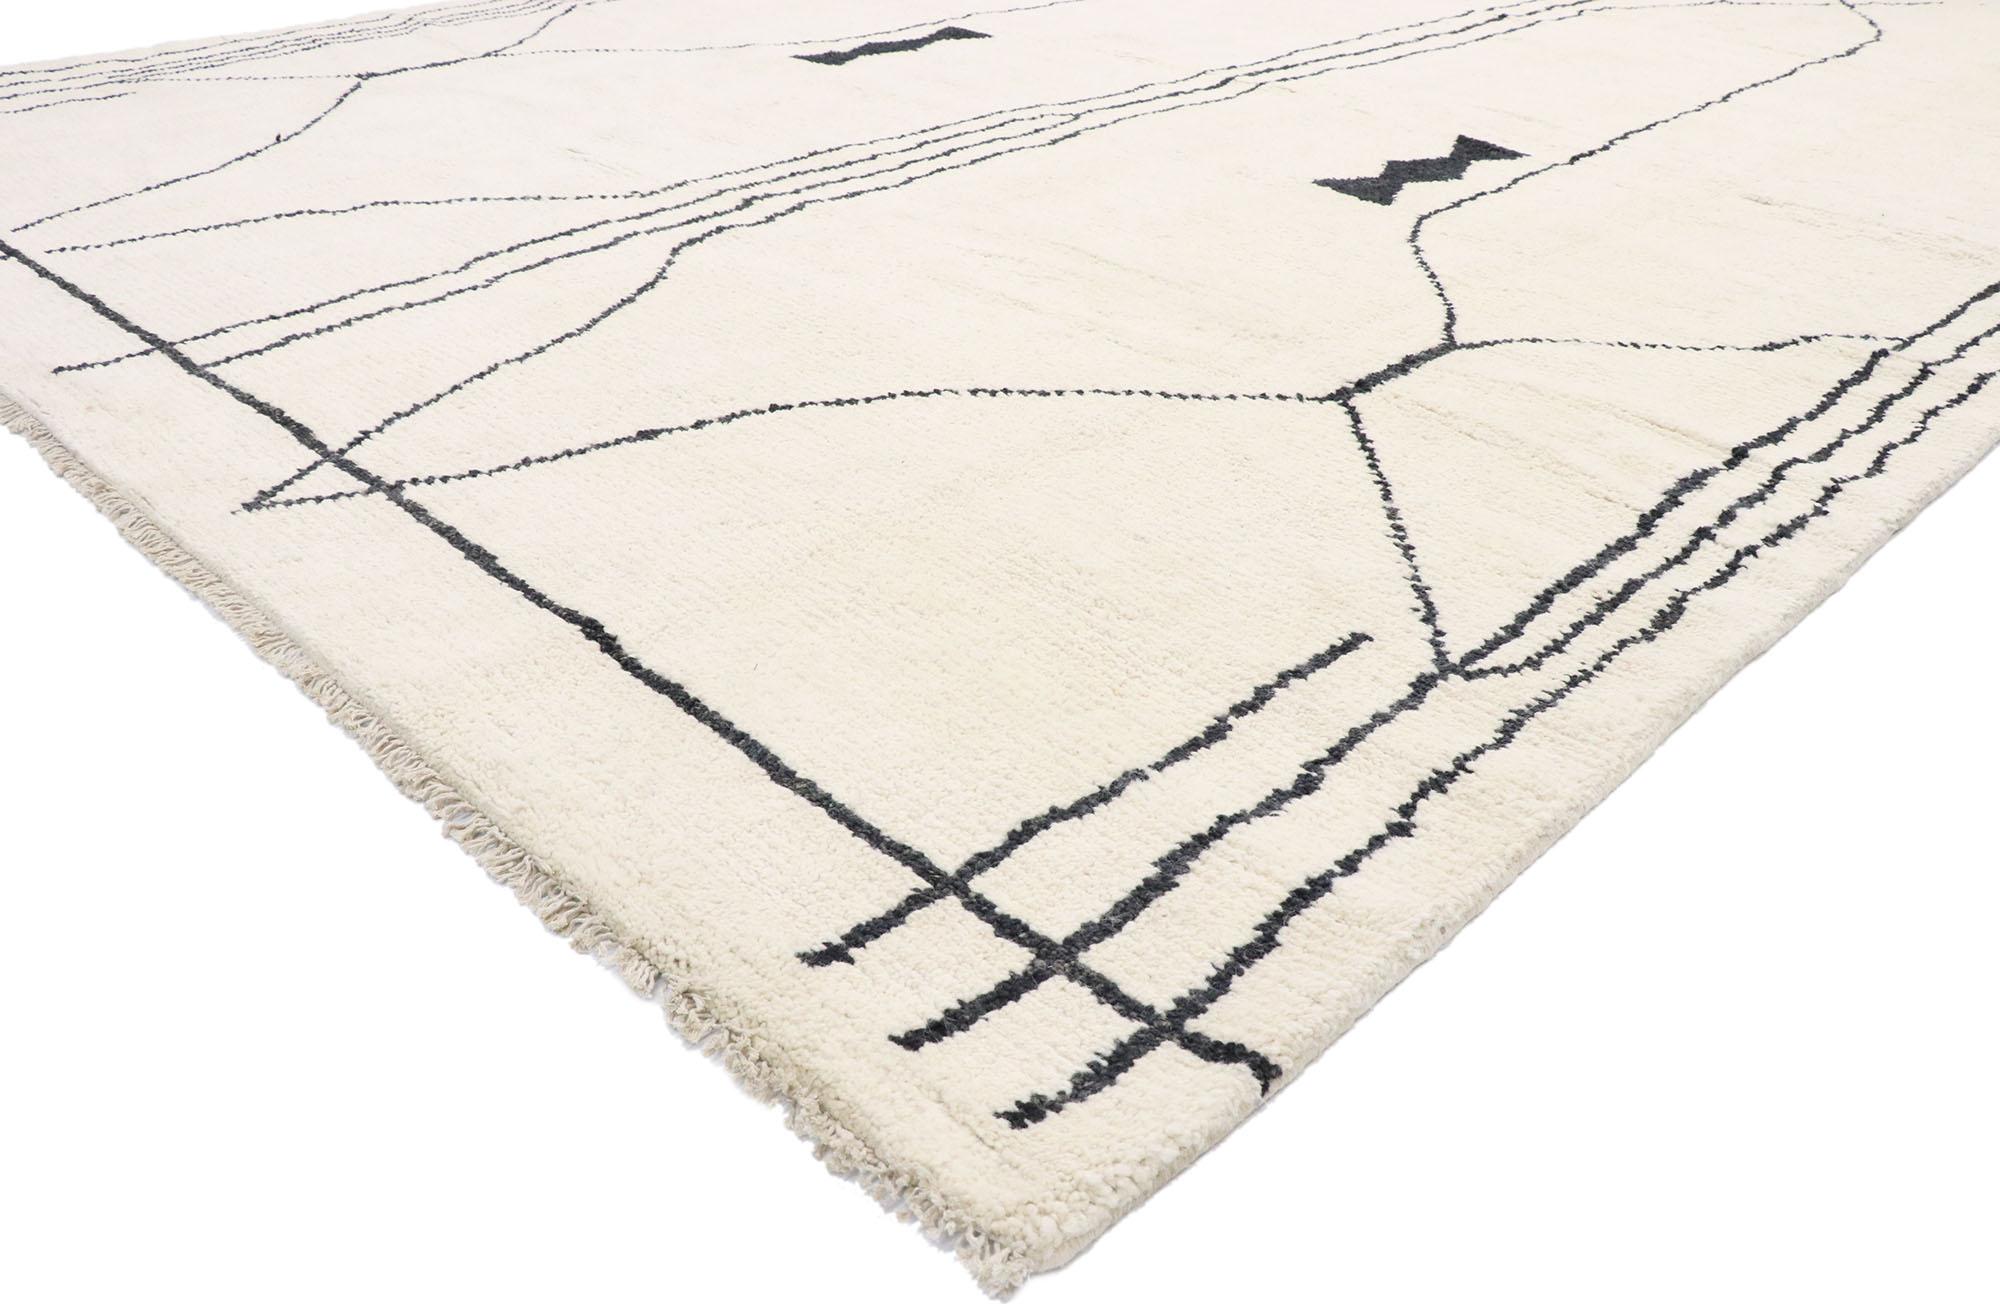 80648, new contemporary Moroccan rug with Modern Tribal style. This hand knotted wool contemporary Moroccan area rug with line art design and tribal style features contrasting black lines running the length of the ivory backdrop and dotted with two